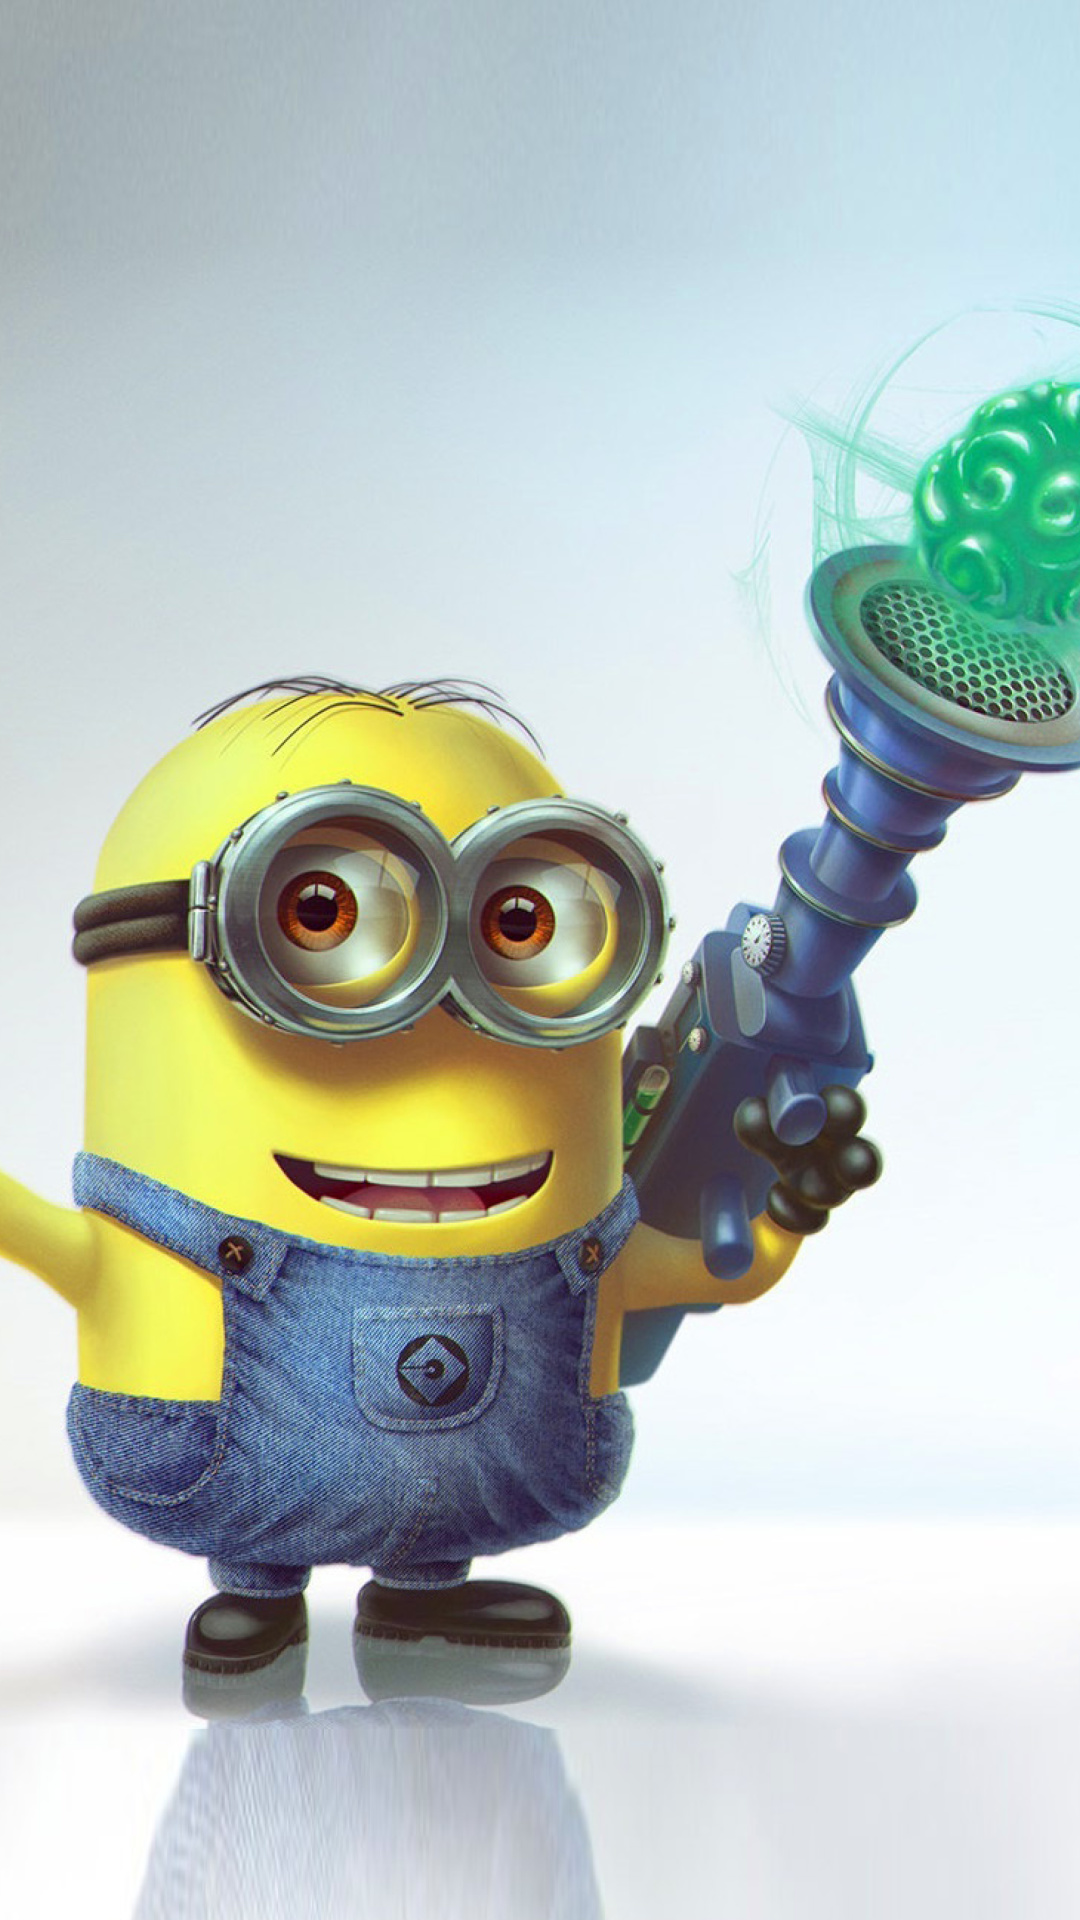 Minion with Laser wallpaper 1080x1920